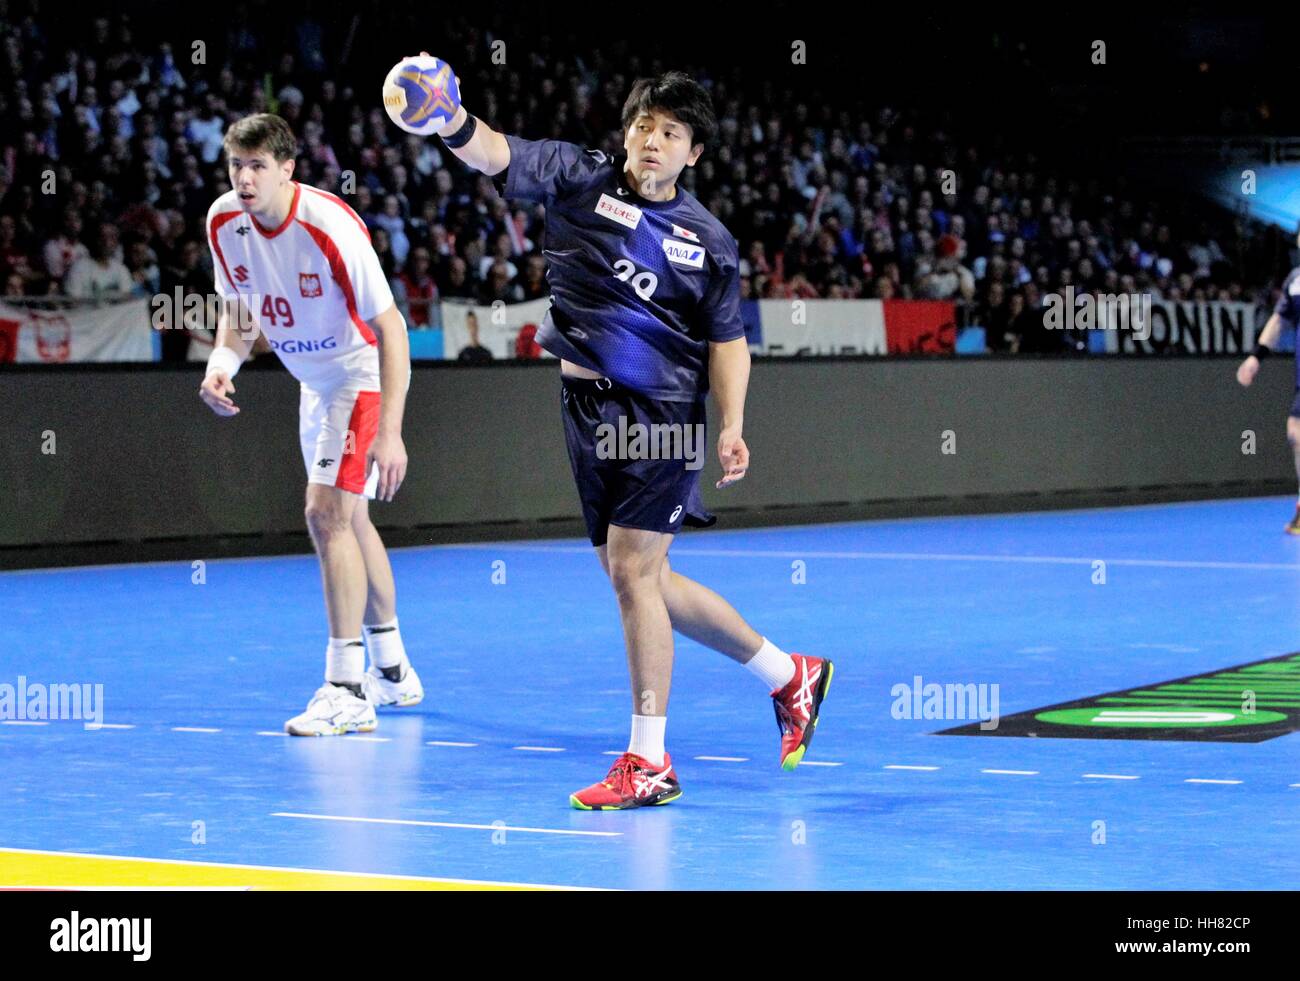 Nantes, France. 17th Jan, 2017. January 17th 2017, Parc Exposition XXL, Nantes, France; 25th World Handball Championships Japan versus Poland; yuto Agarie in shooting action Credit: Laurent Lairys/Agence Locevaphotos/Alamy Live News Stock Photo